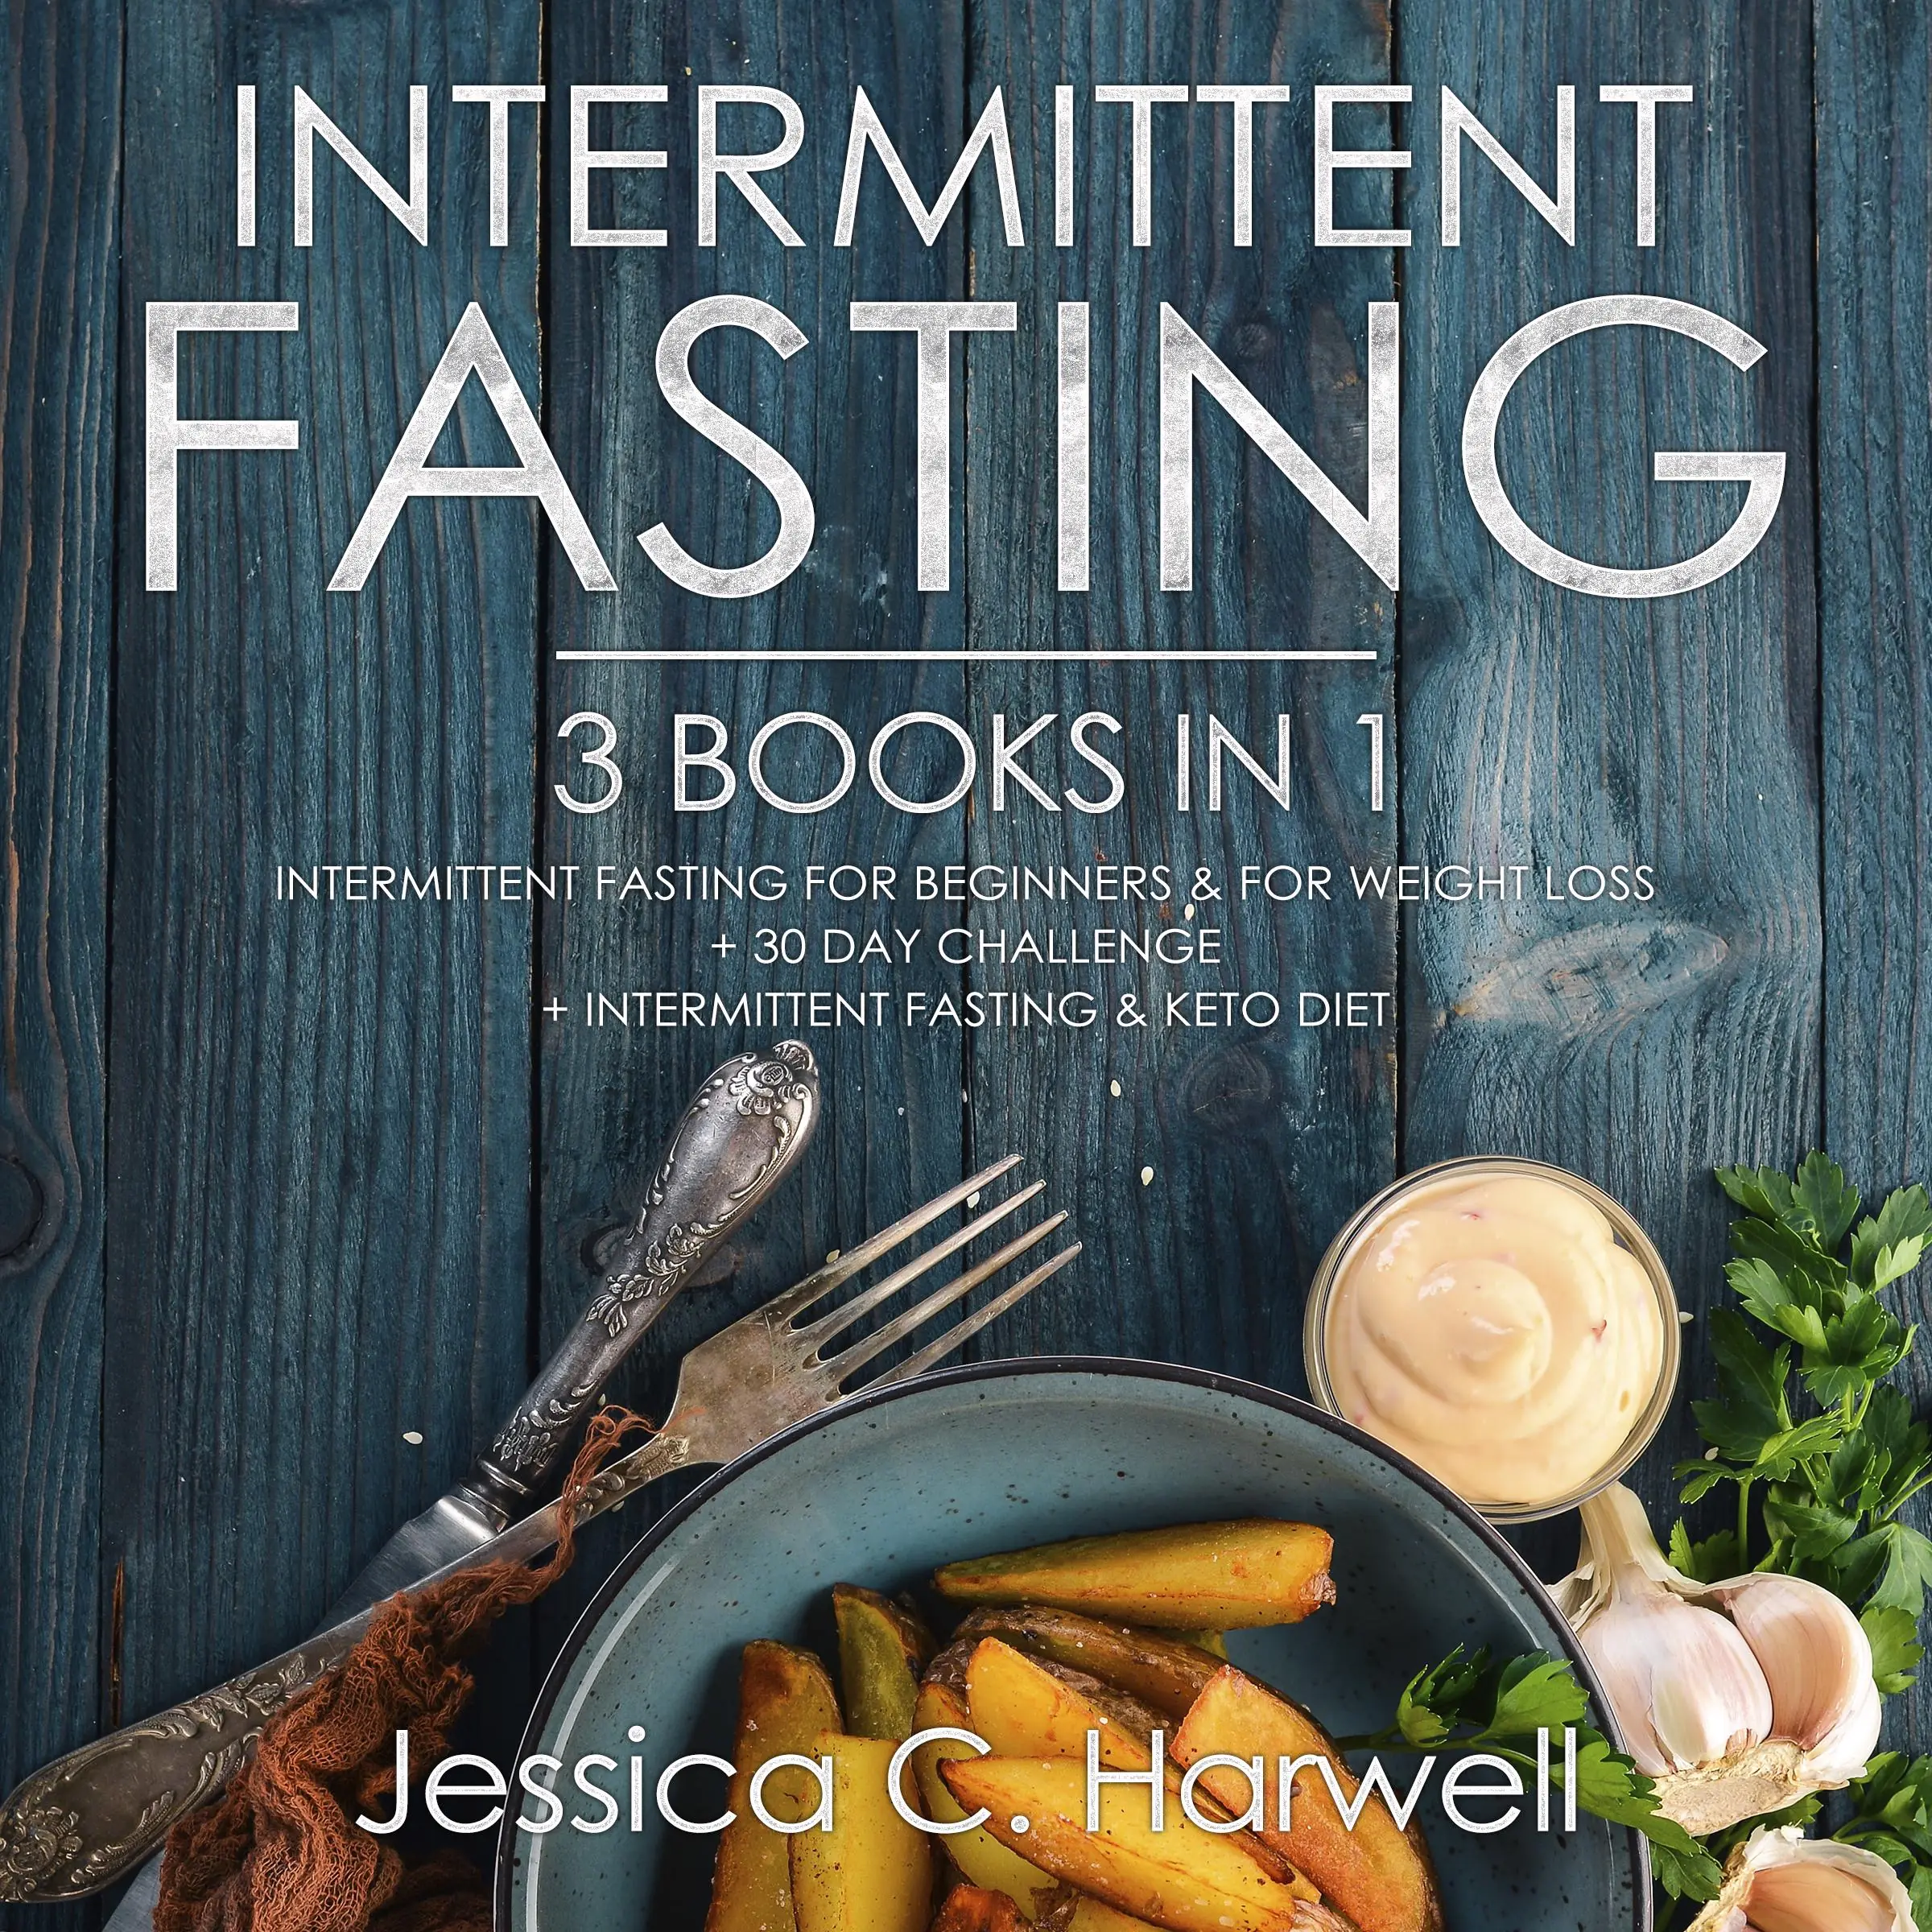 Intermittent Fasting: 3 Books in 1 - Intermittent Fasting for Beginners & Weight Loss + 30 Day Challenge + Intermittent Fasting & Keto Diet Audiobook by Jessica C. Harwell